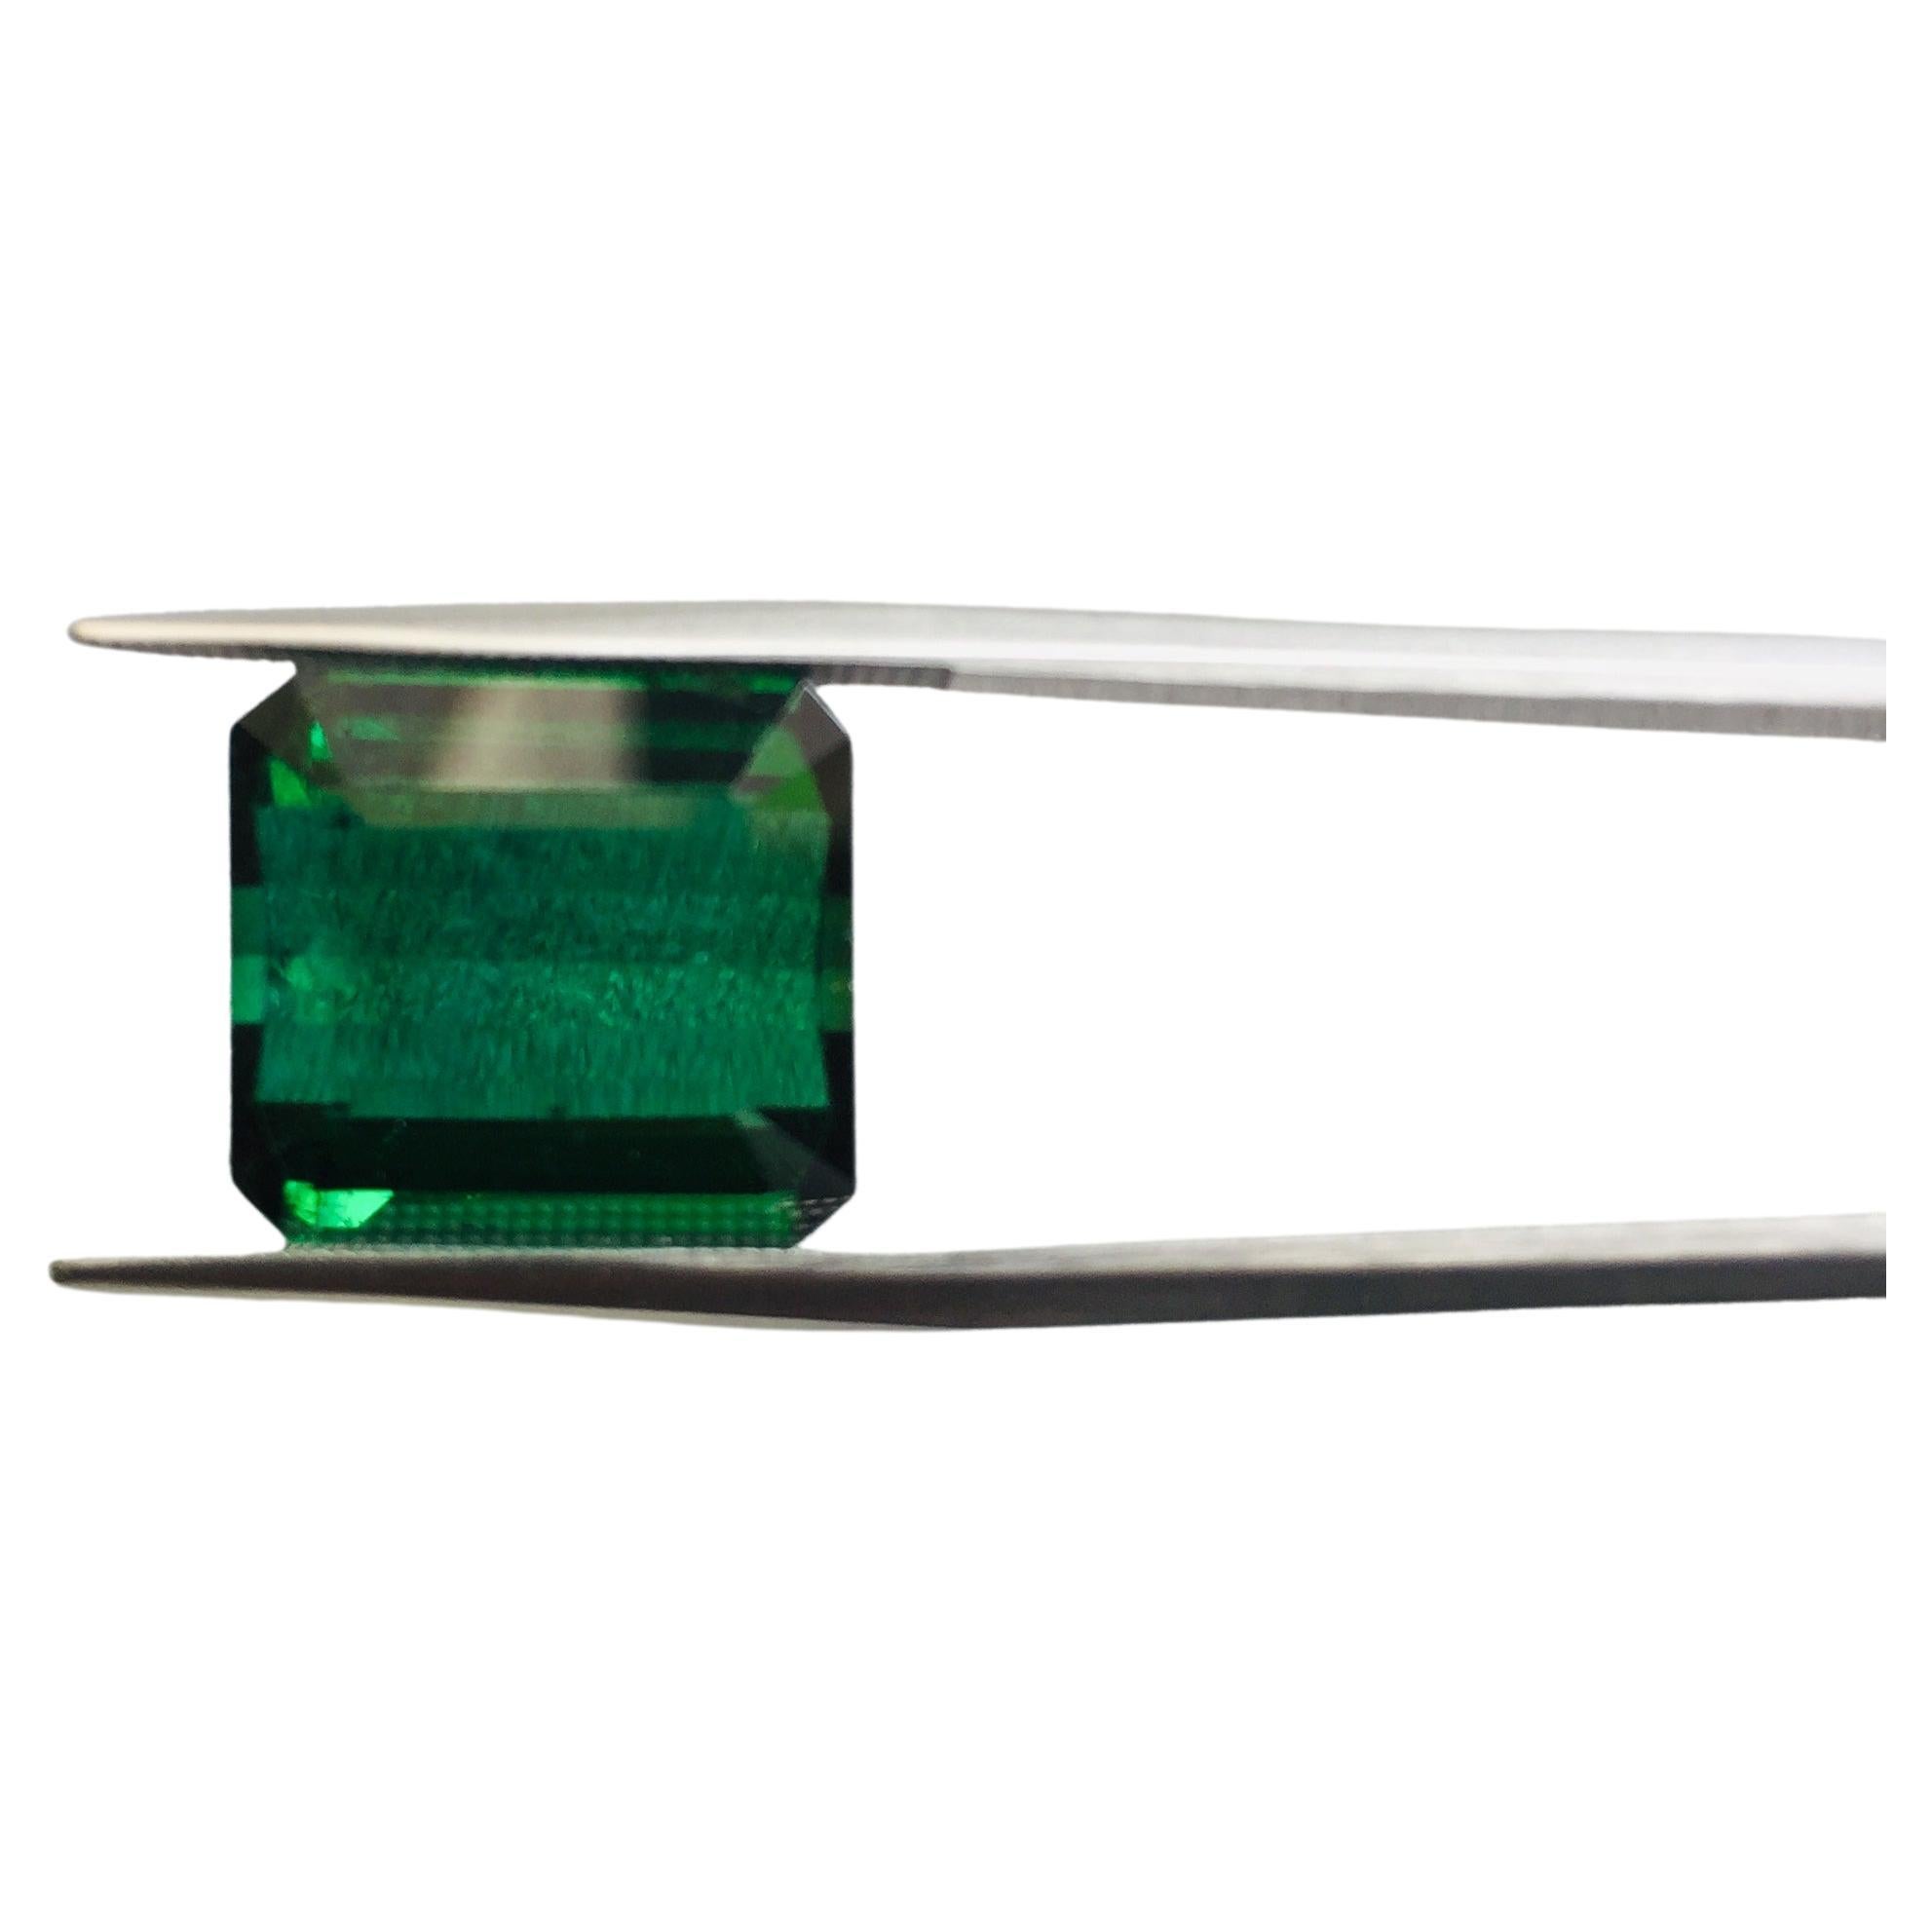 This high-quality tourmaline, this gemstone boasts a stunning green hue that is perfect for your fine jewelry collection. The natural beauty of the green tourmaline is truly remarkable, with its rich color and clarity.

Our 11.86 Carat Green